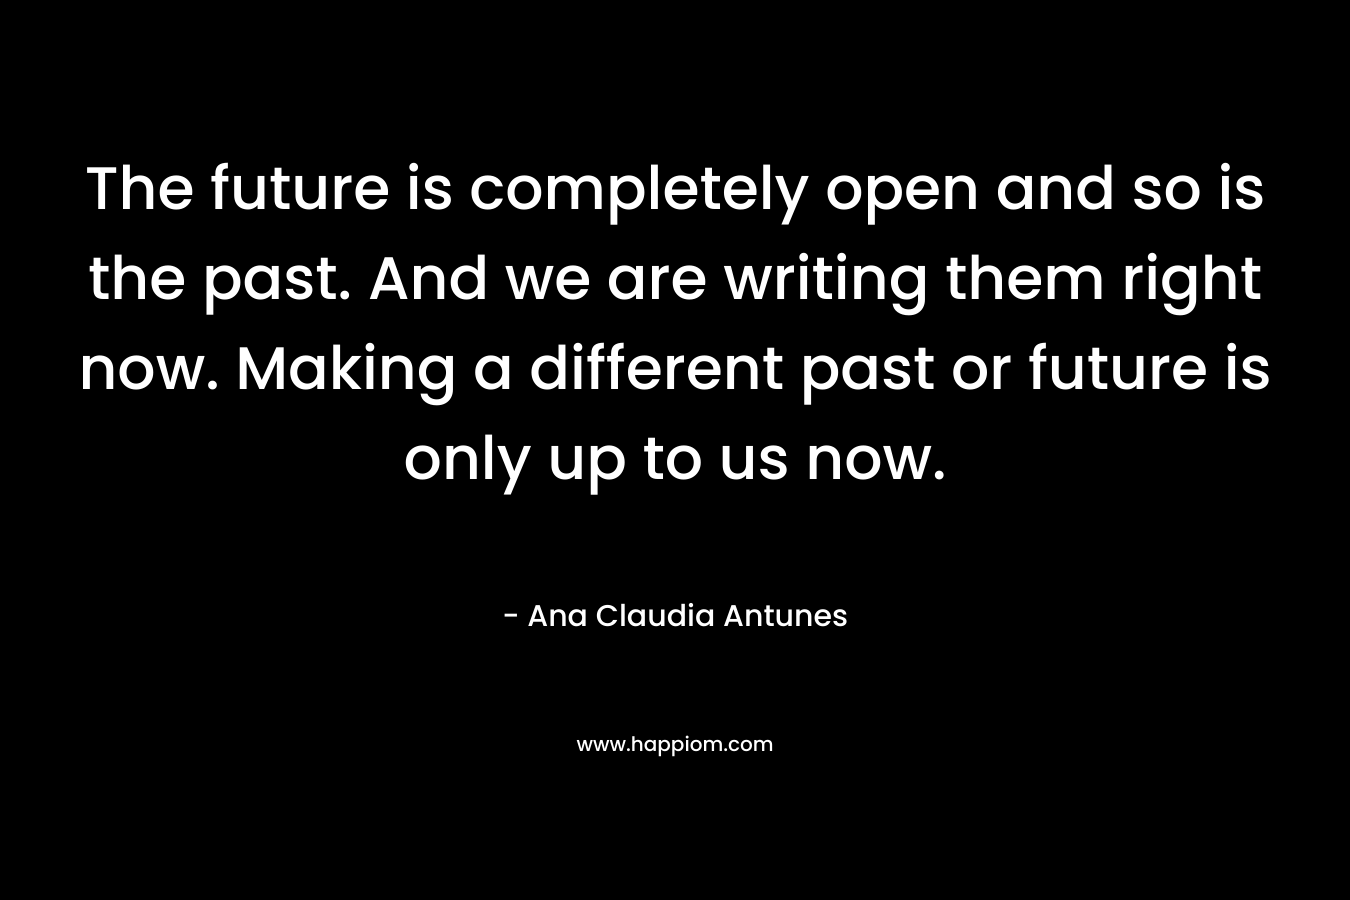 The future is completely open and so is the past. And we are writing them right now. Making a different past or future is only up to us now.